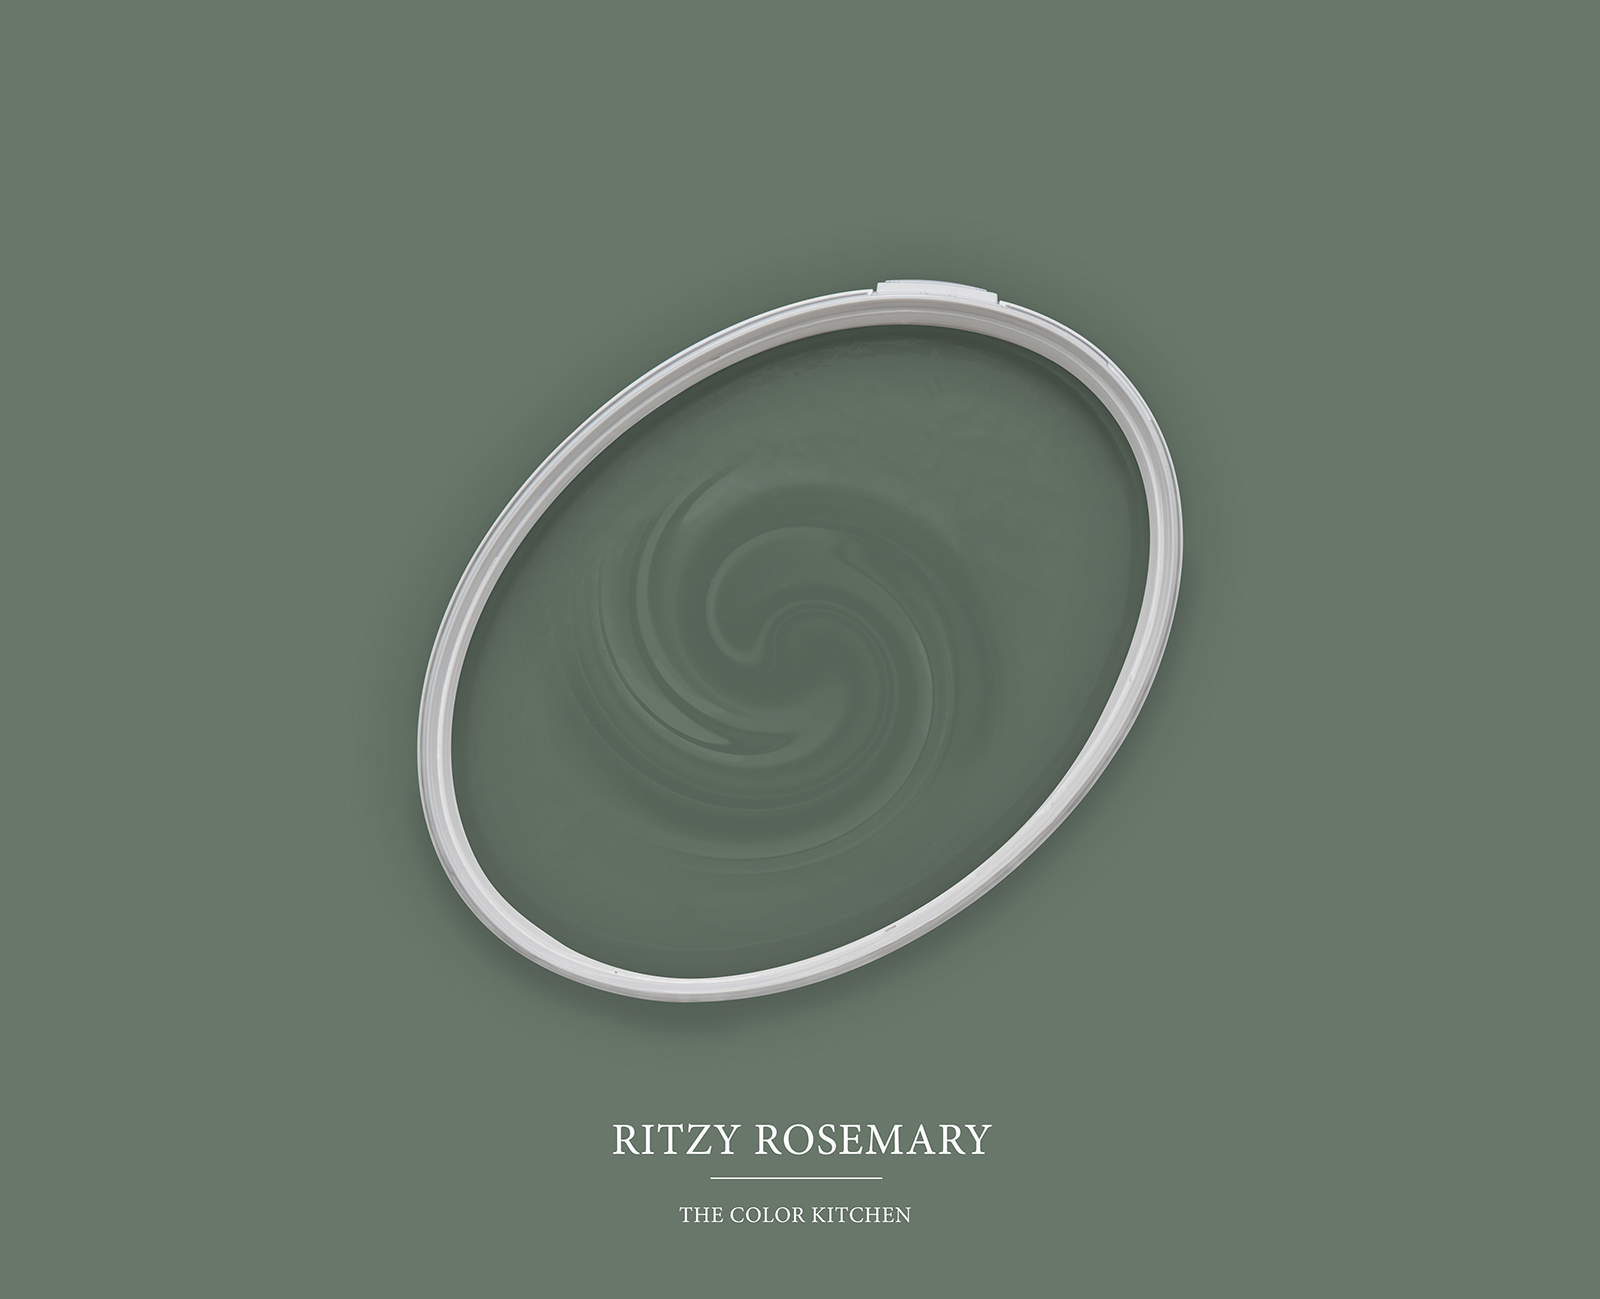 Wall Paint TCK4005 »Ritzy Rosemary« in homely green – 5.0 litre
